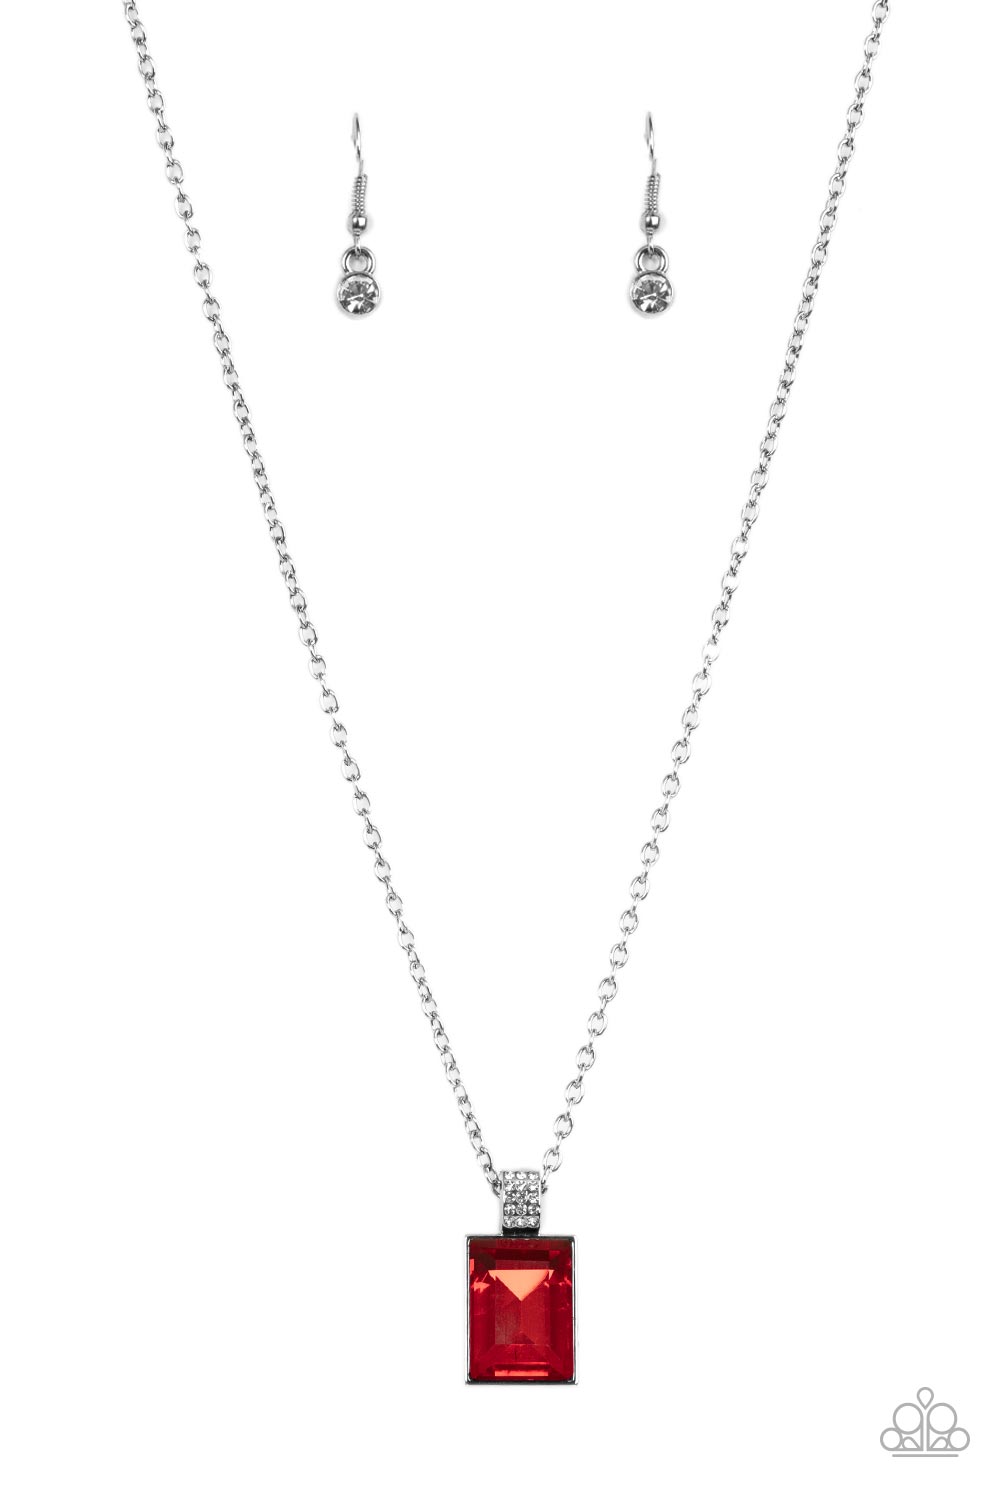 Understated Dazzle Necklace (Red, Silver)